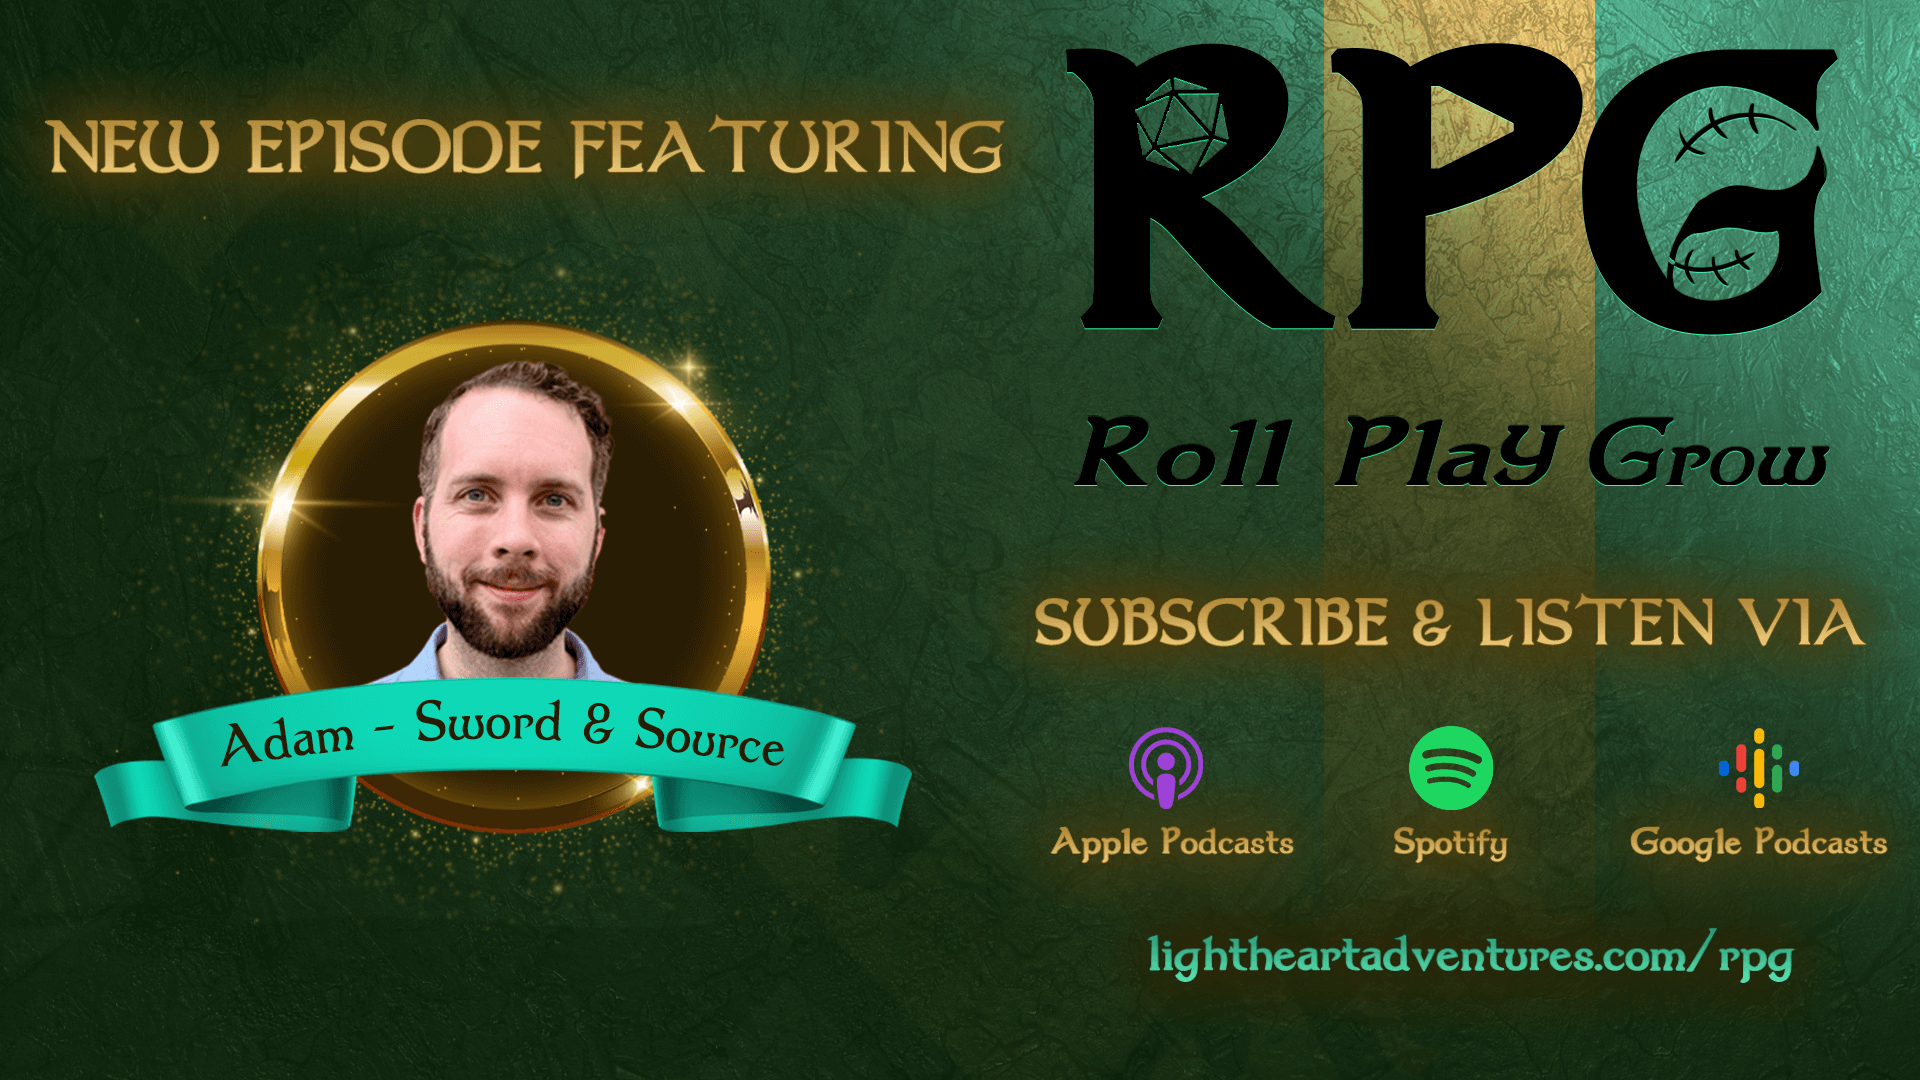 My appearance on the Roll Play Grow Podcast